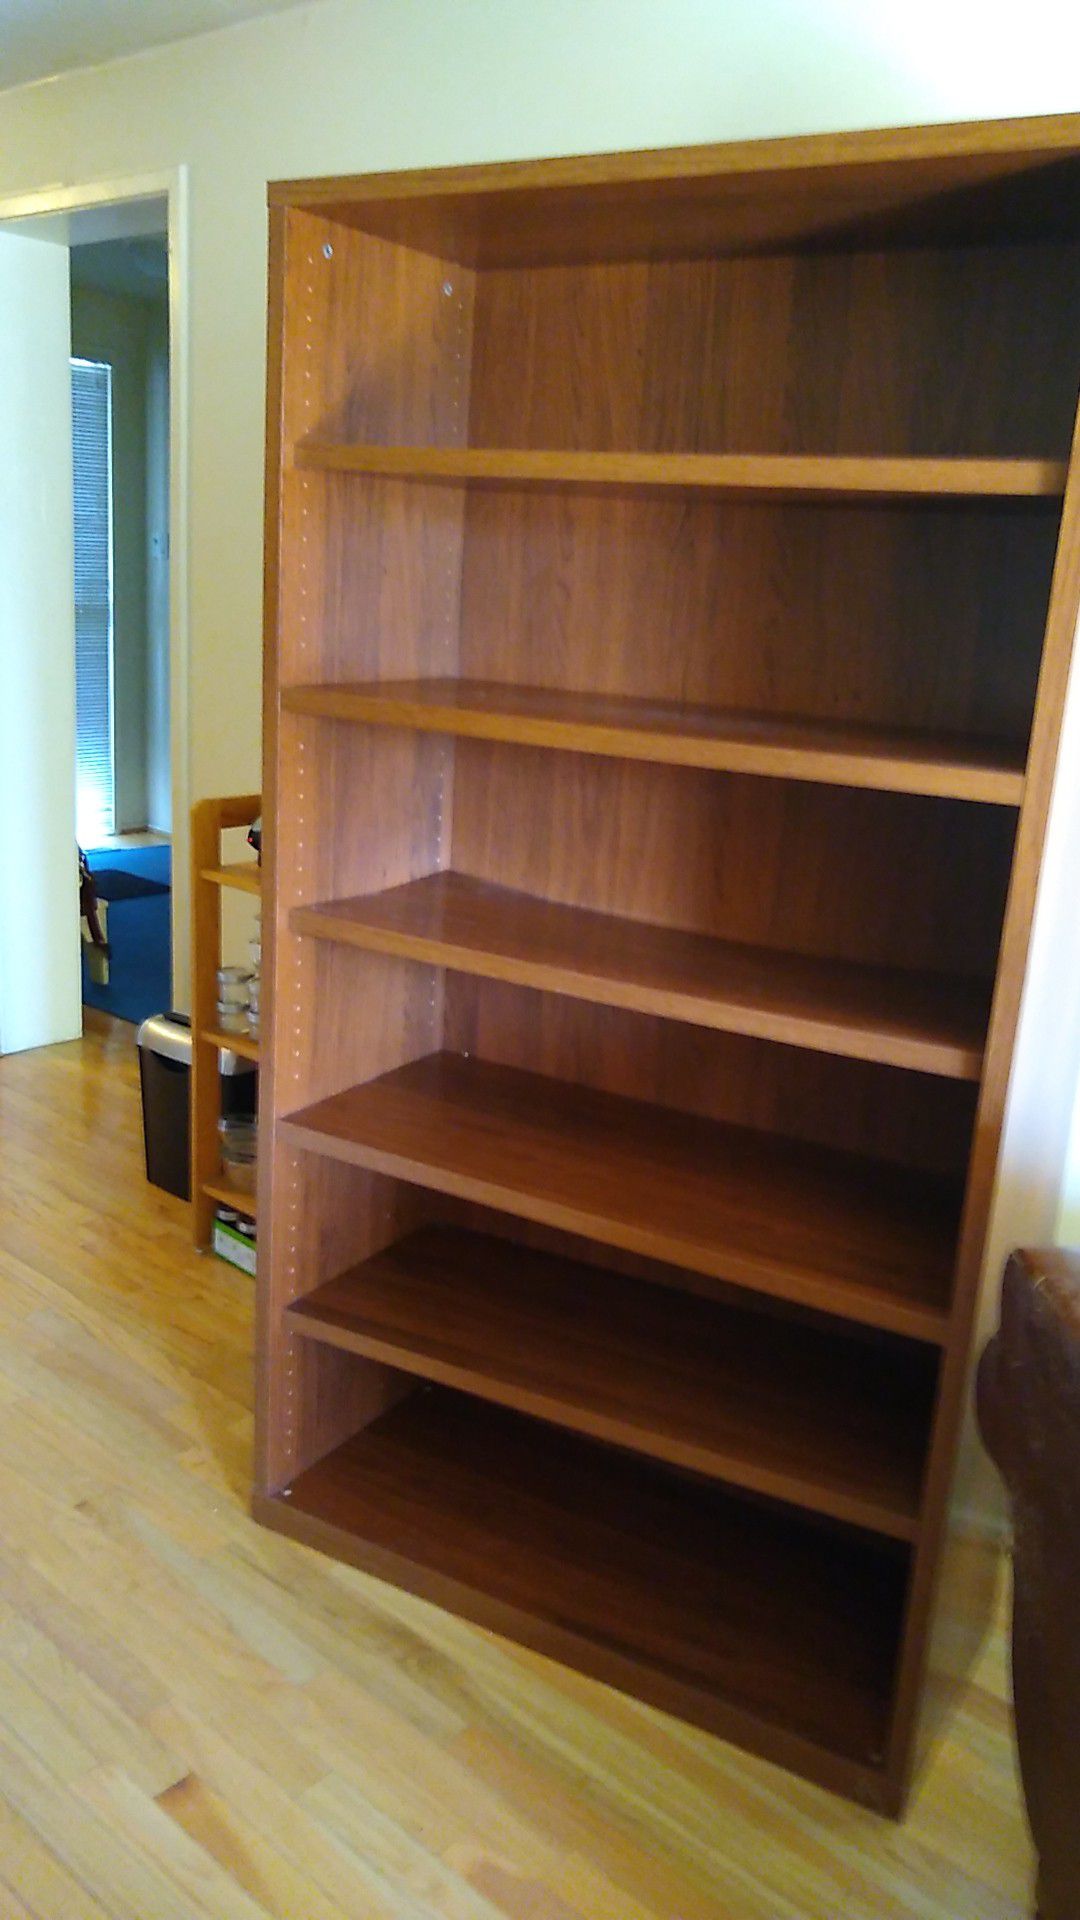 Two Ikea Bookcases one price takes both